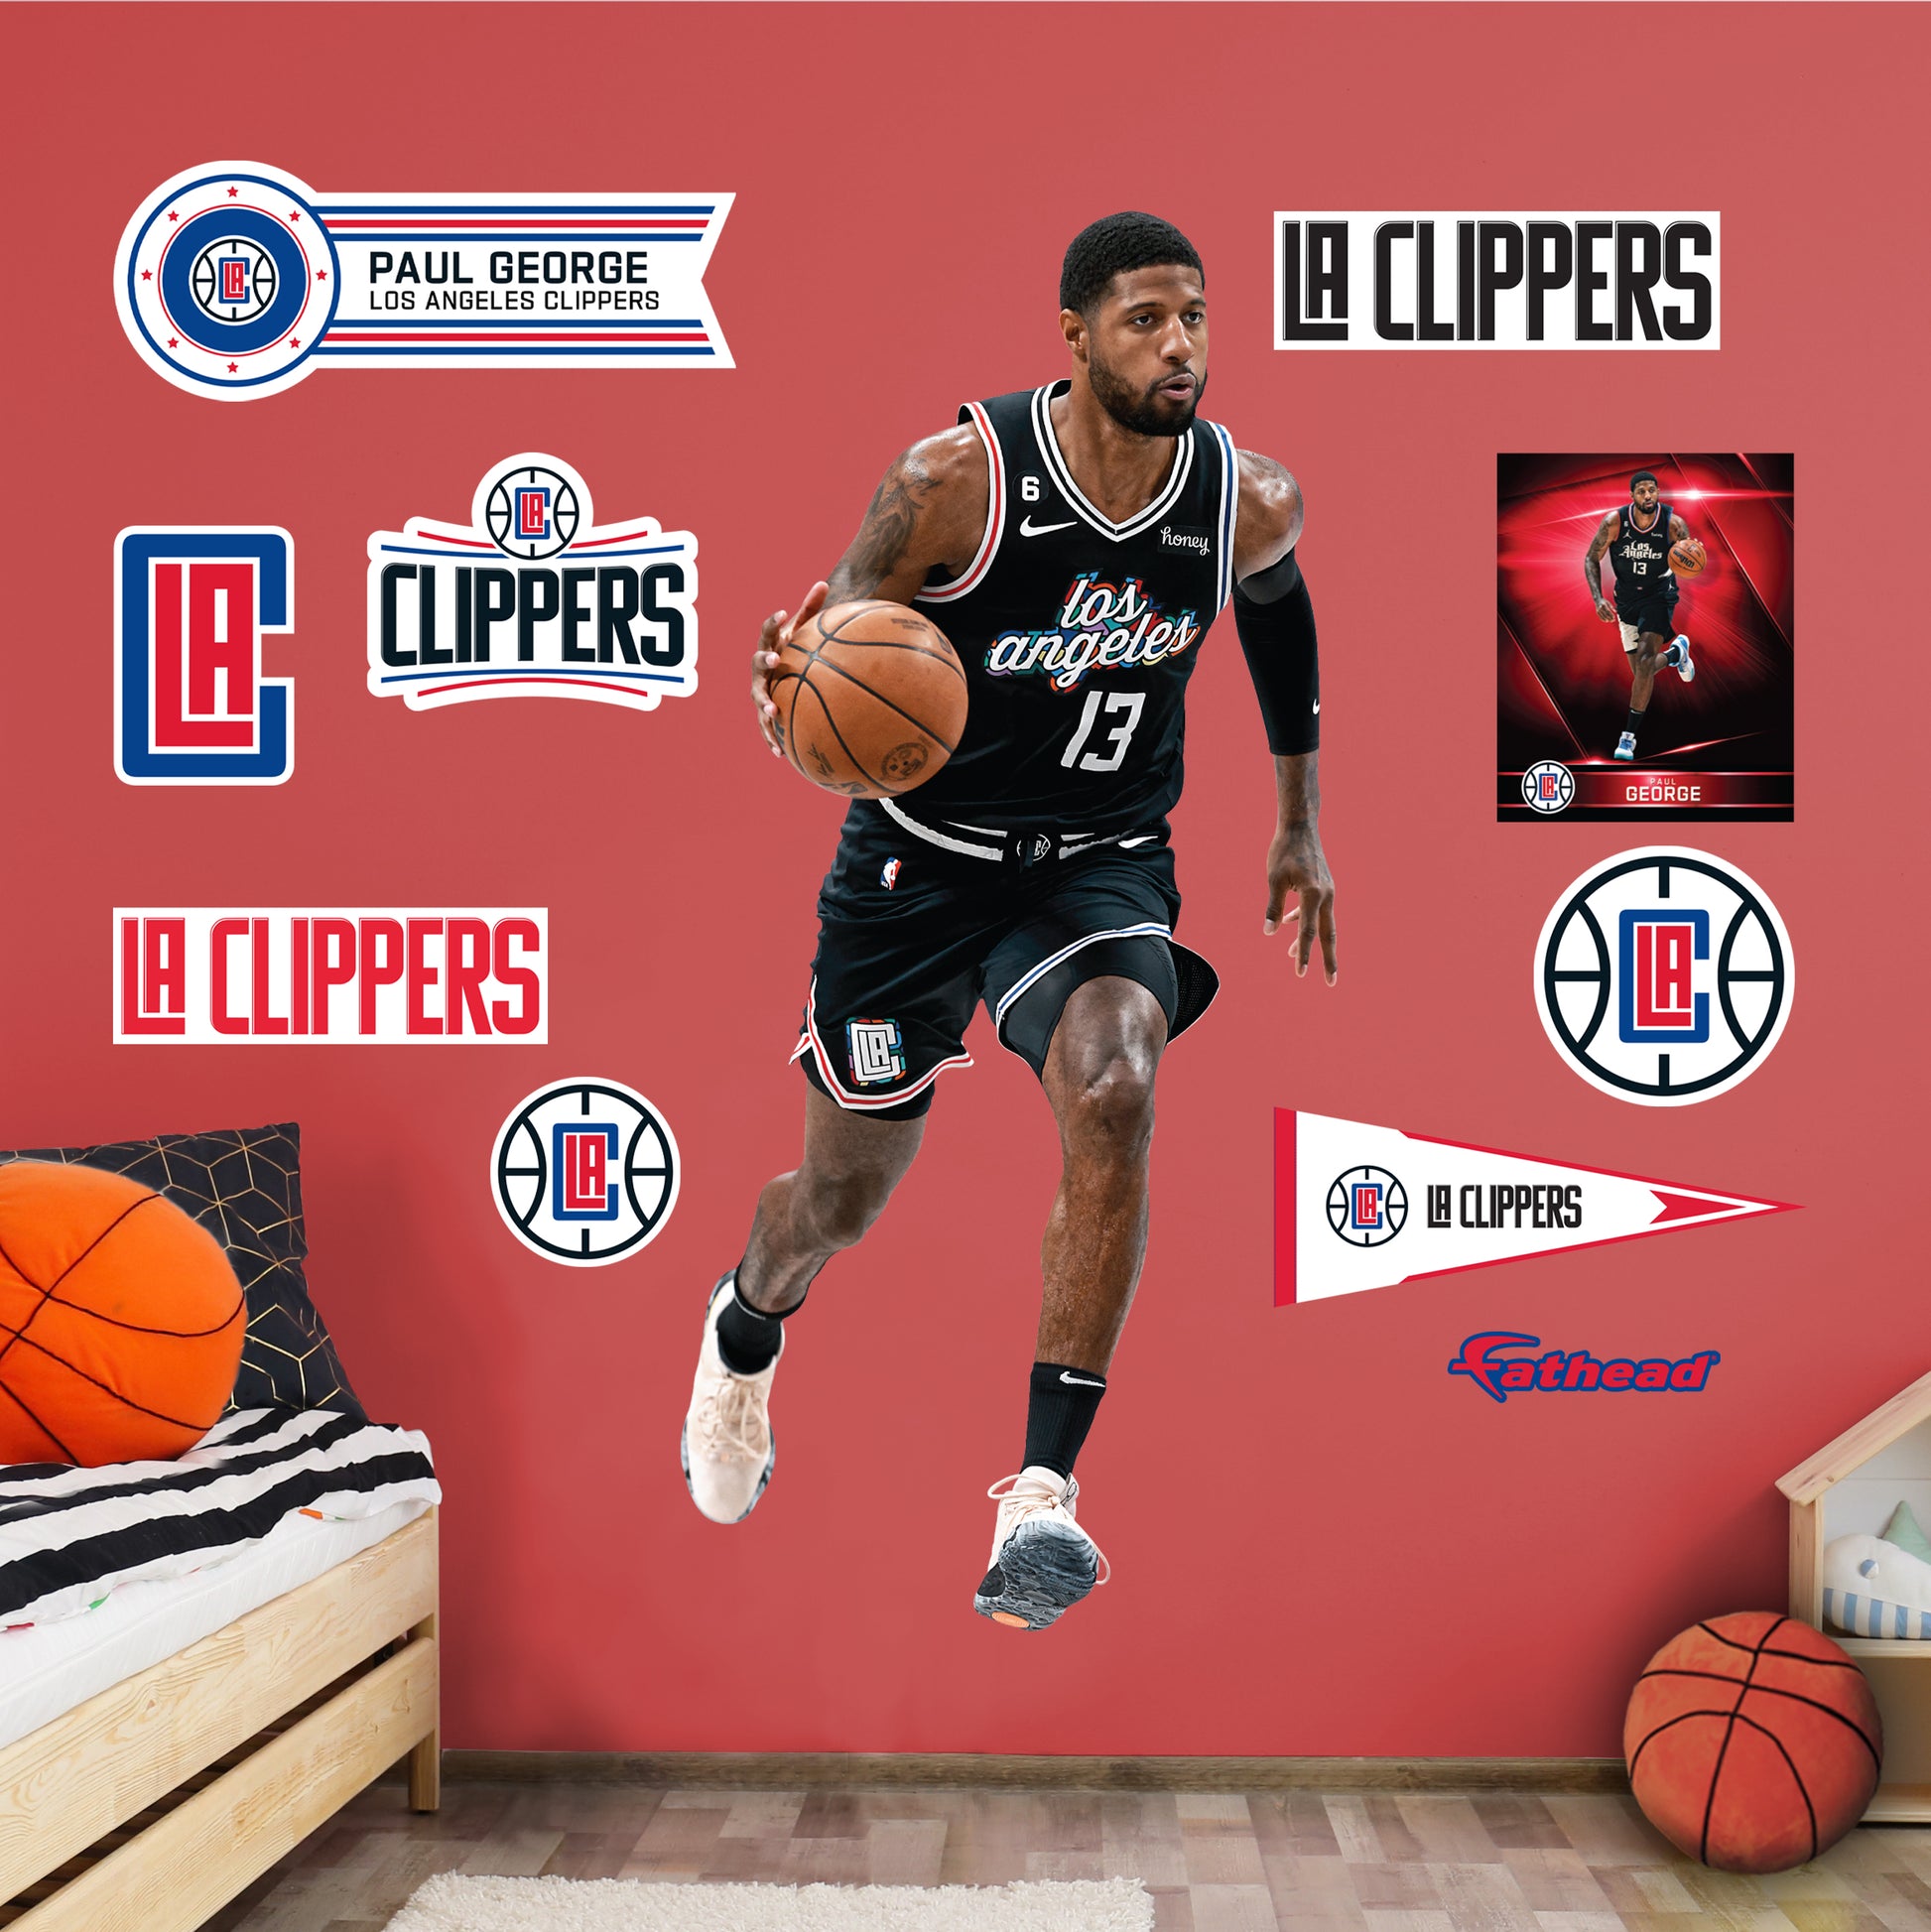 2022 WALL#11 Los Angeles Clippers City Edition NBA Jersey Blue